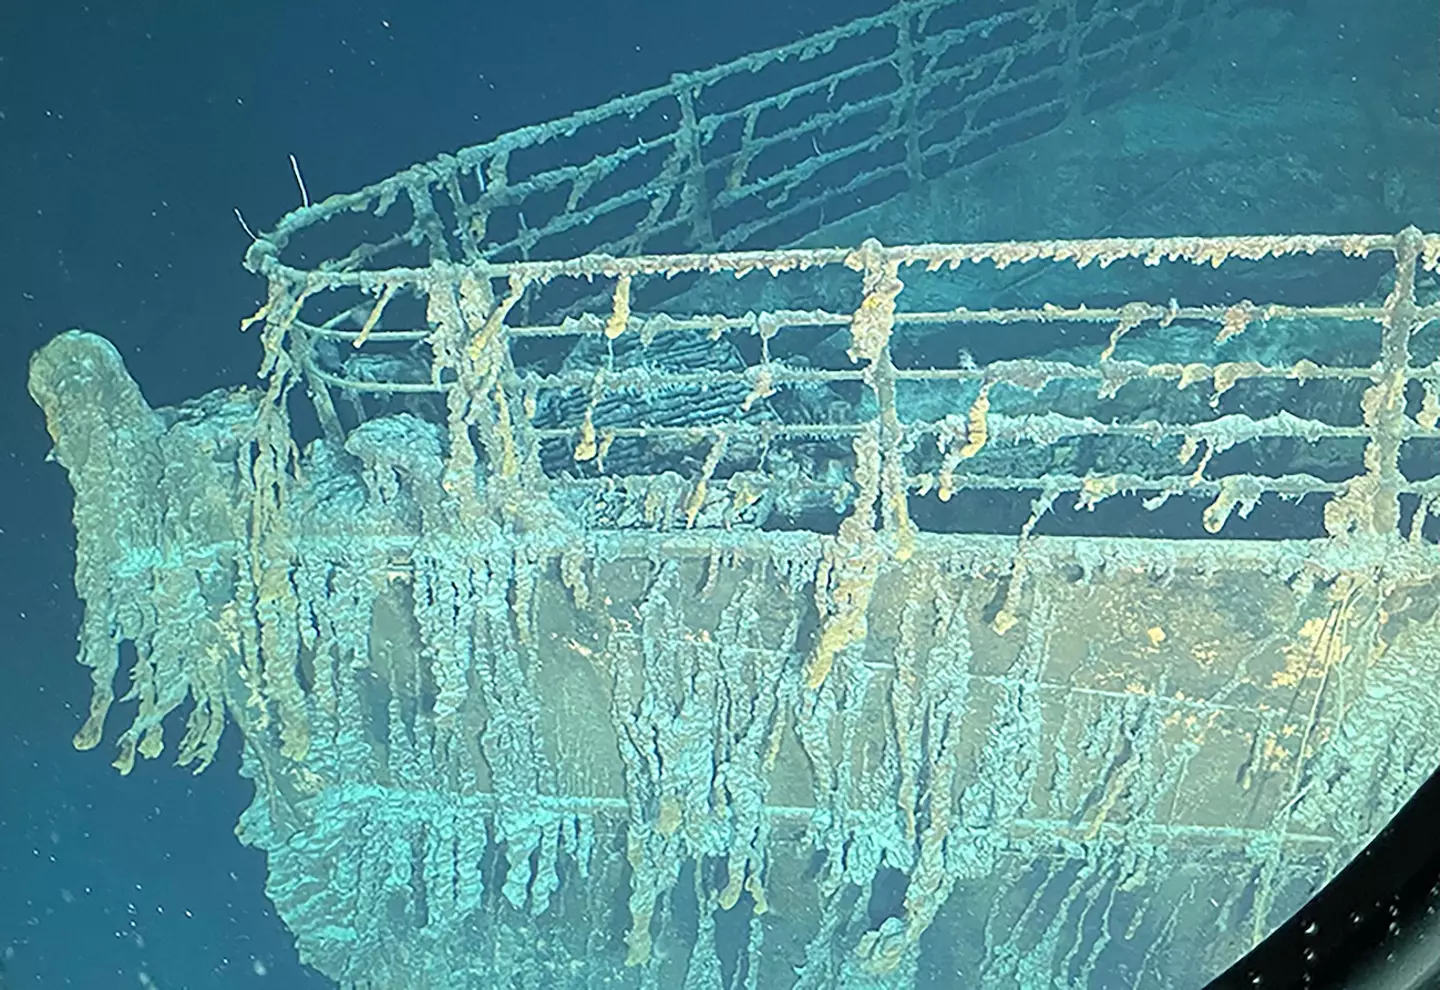 Relatives of Titanic victims want adventurers to stop visiting the wreck.